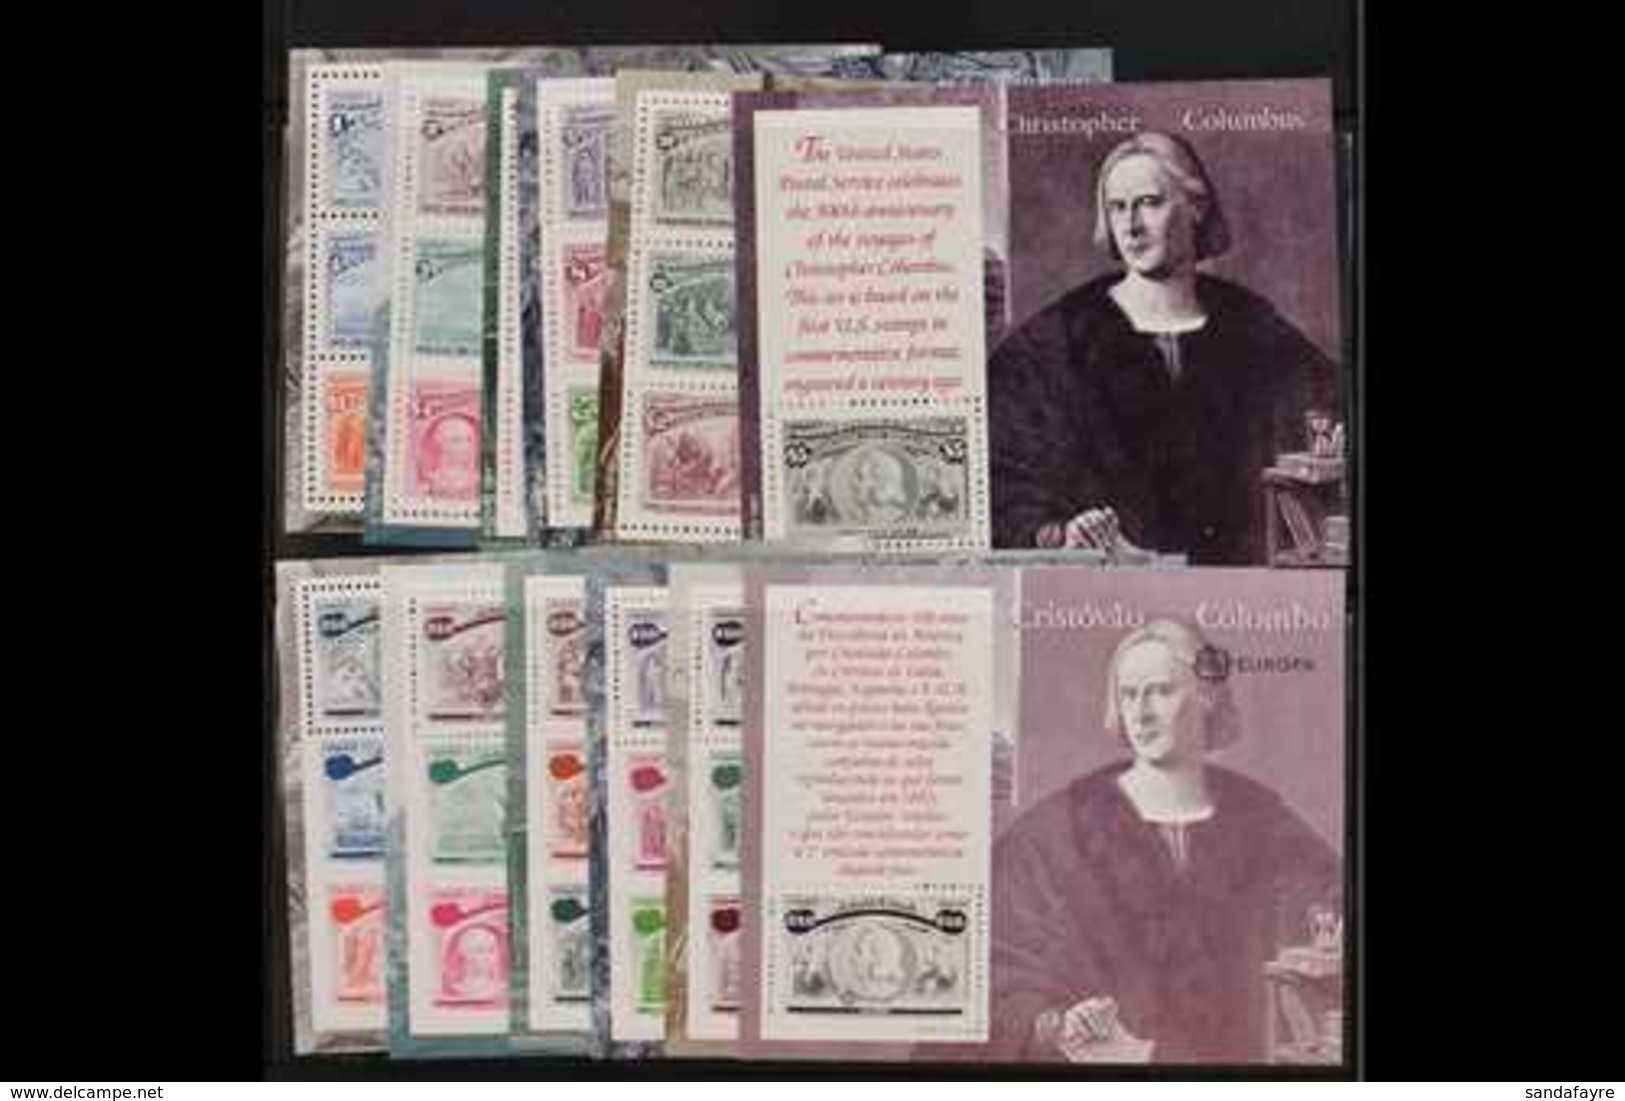 COLUMBUS OMNIBUS ISSUES 1992 USA, Italy, Portugal And Spain Miniature Sheets Complete Sets, Never Hinged Mint, Fresh. (2 - Non Classificati